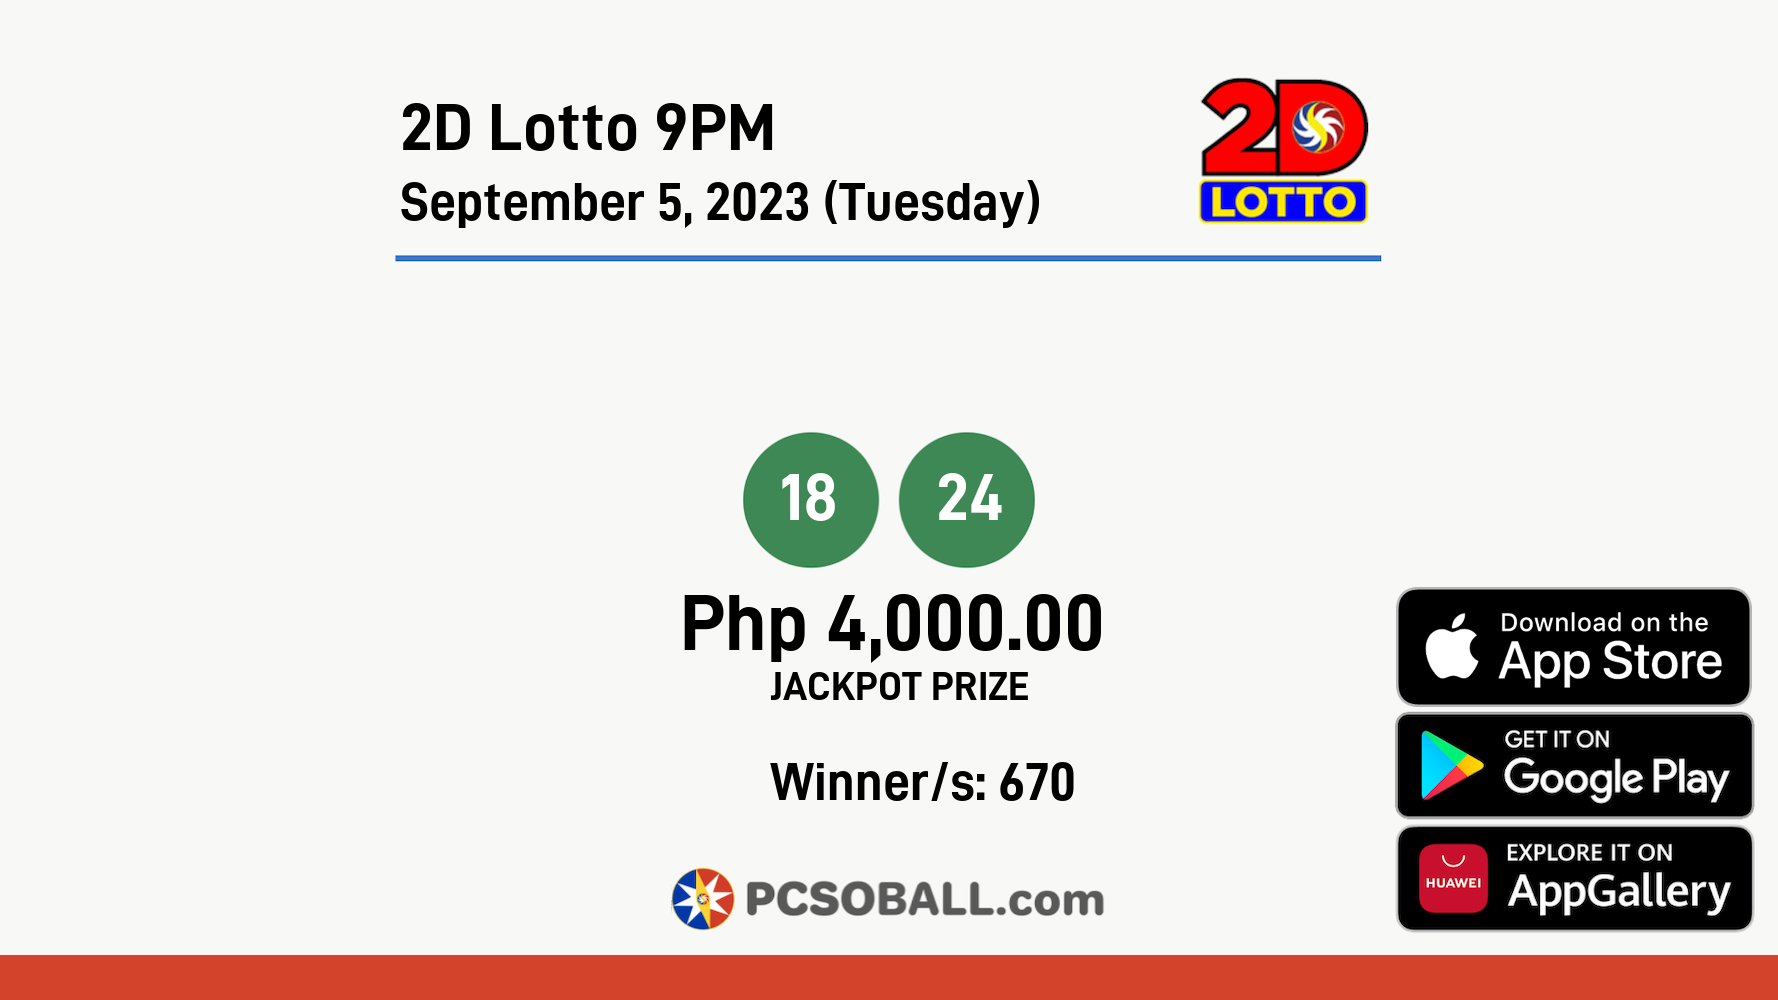 2D Lotto 9PM September 5, 2023 (Tuesday) Result